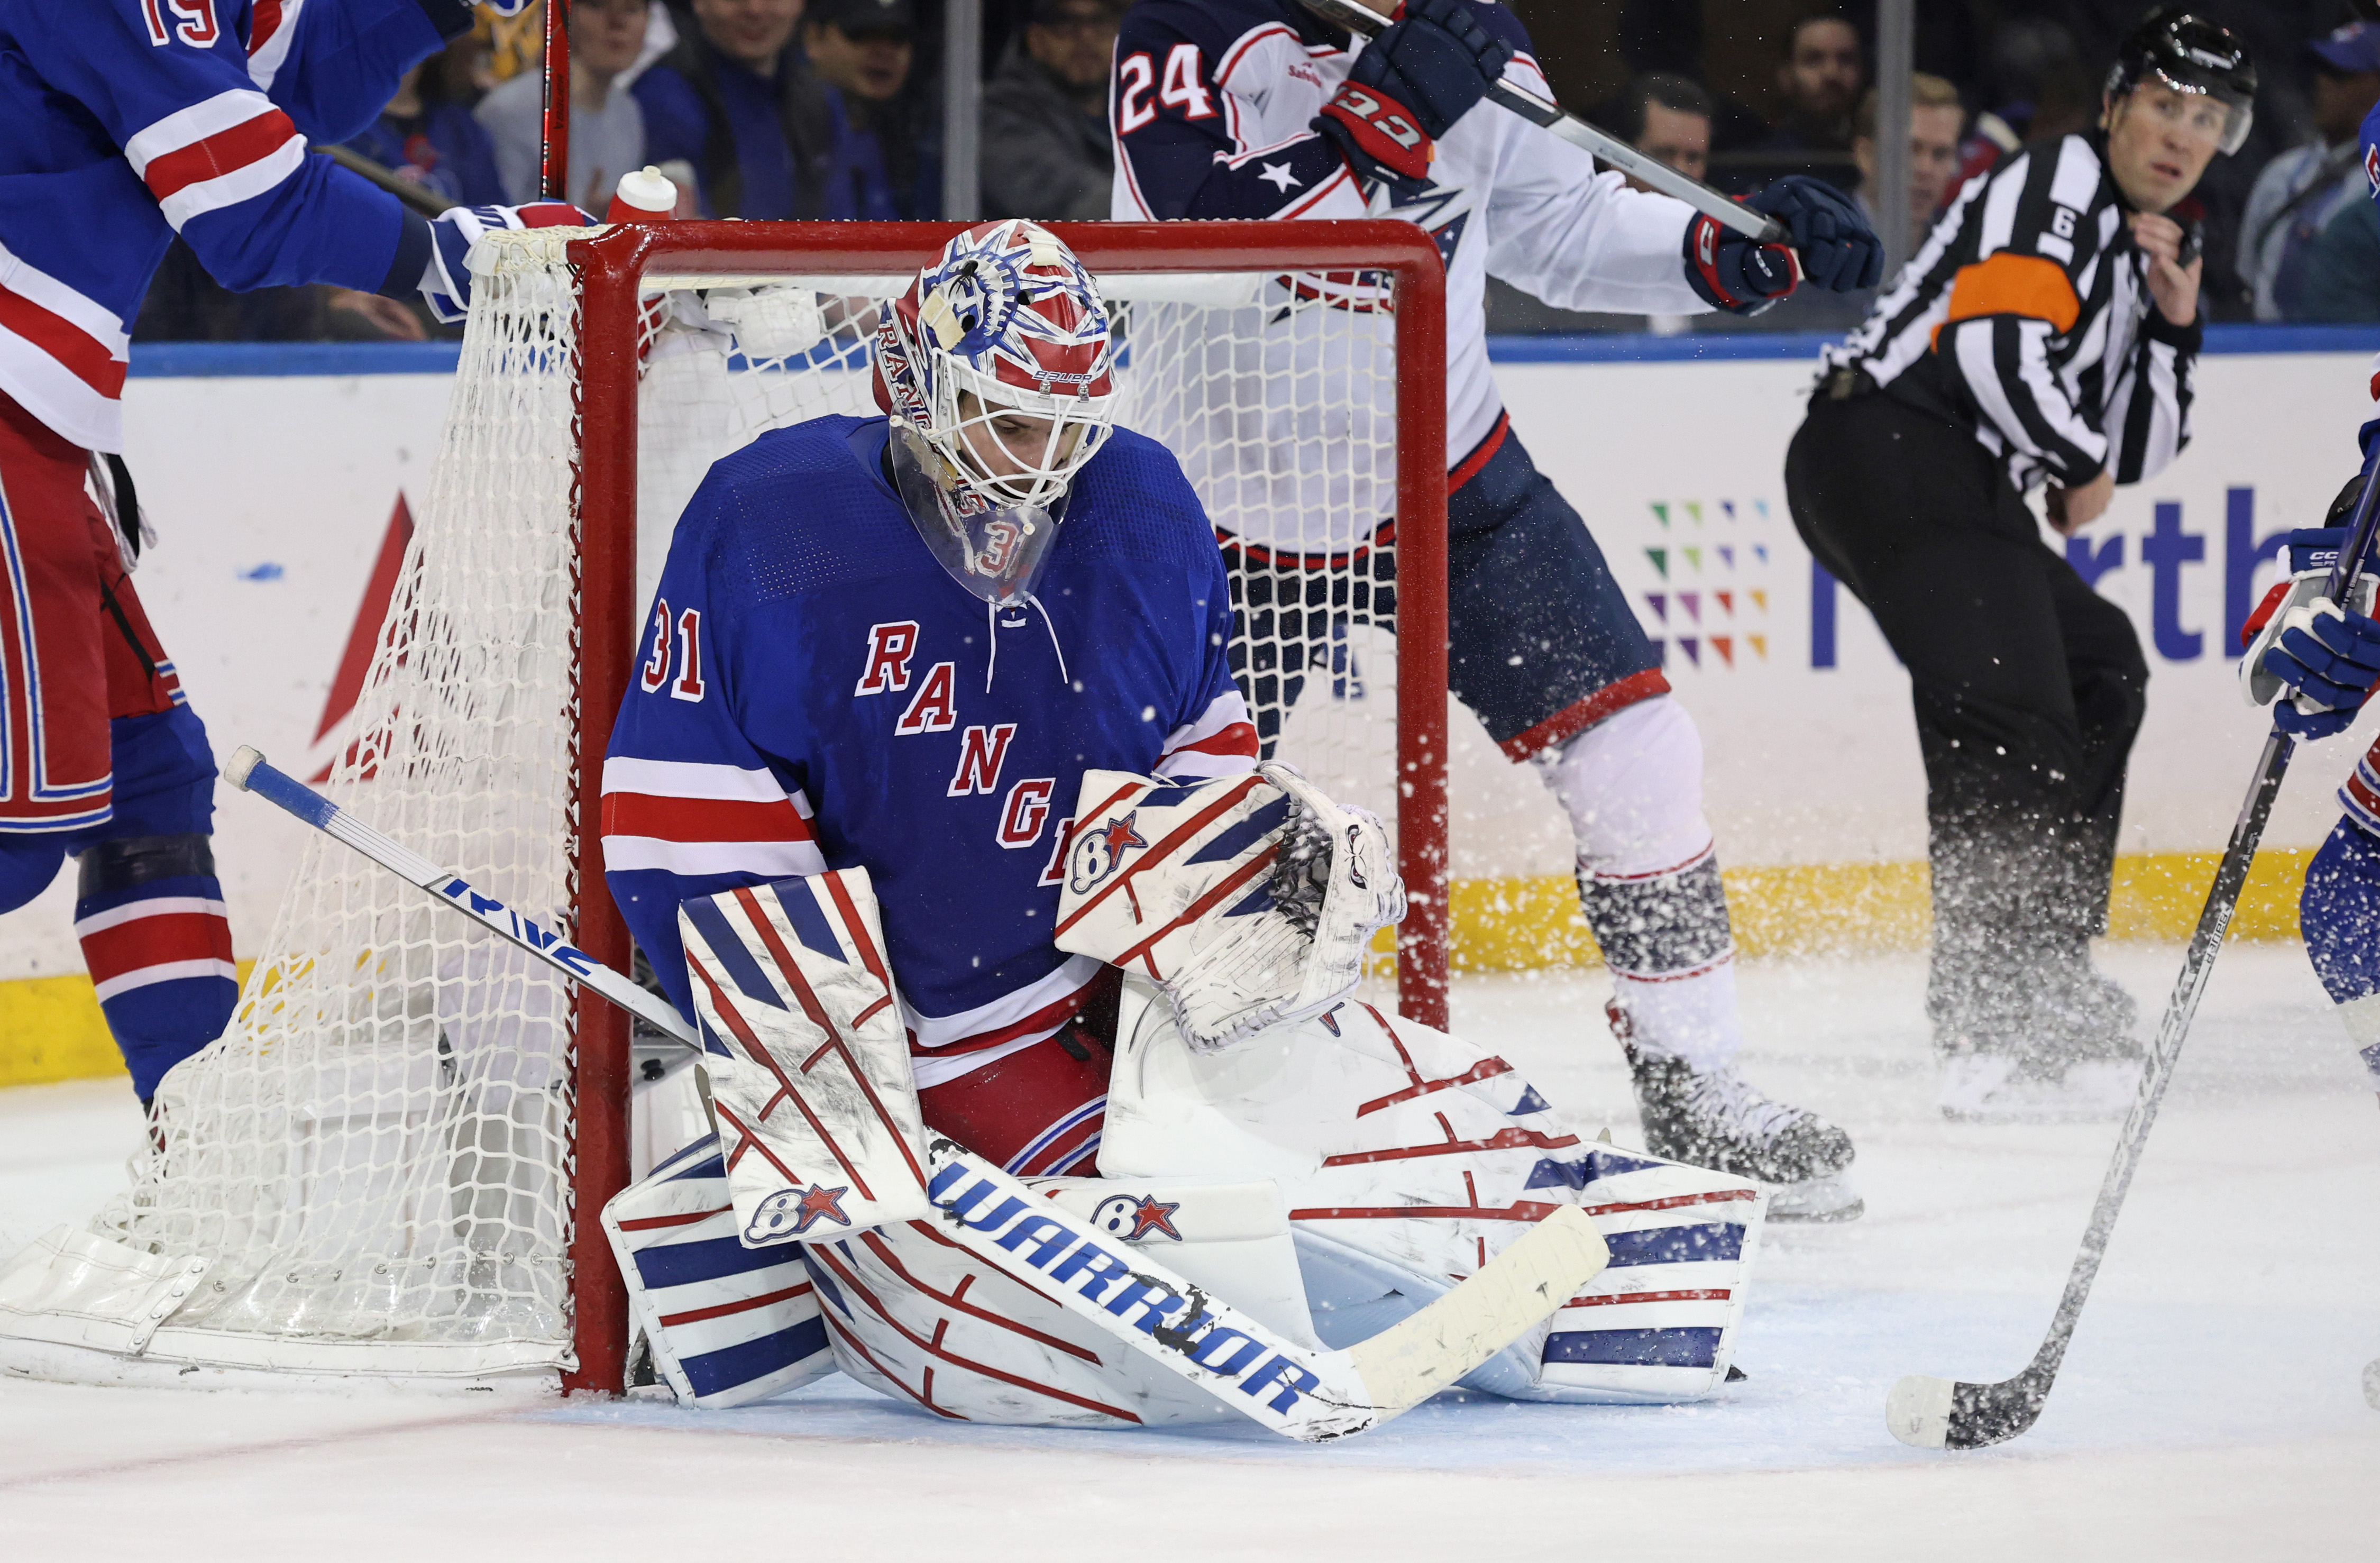 Igor Shesterkin, who picked up the victory in the Rangers' 4-1 win over the Blue Jackets, had a 7-0 record in February.